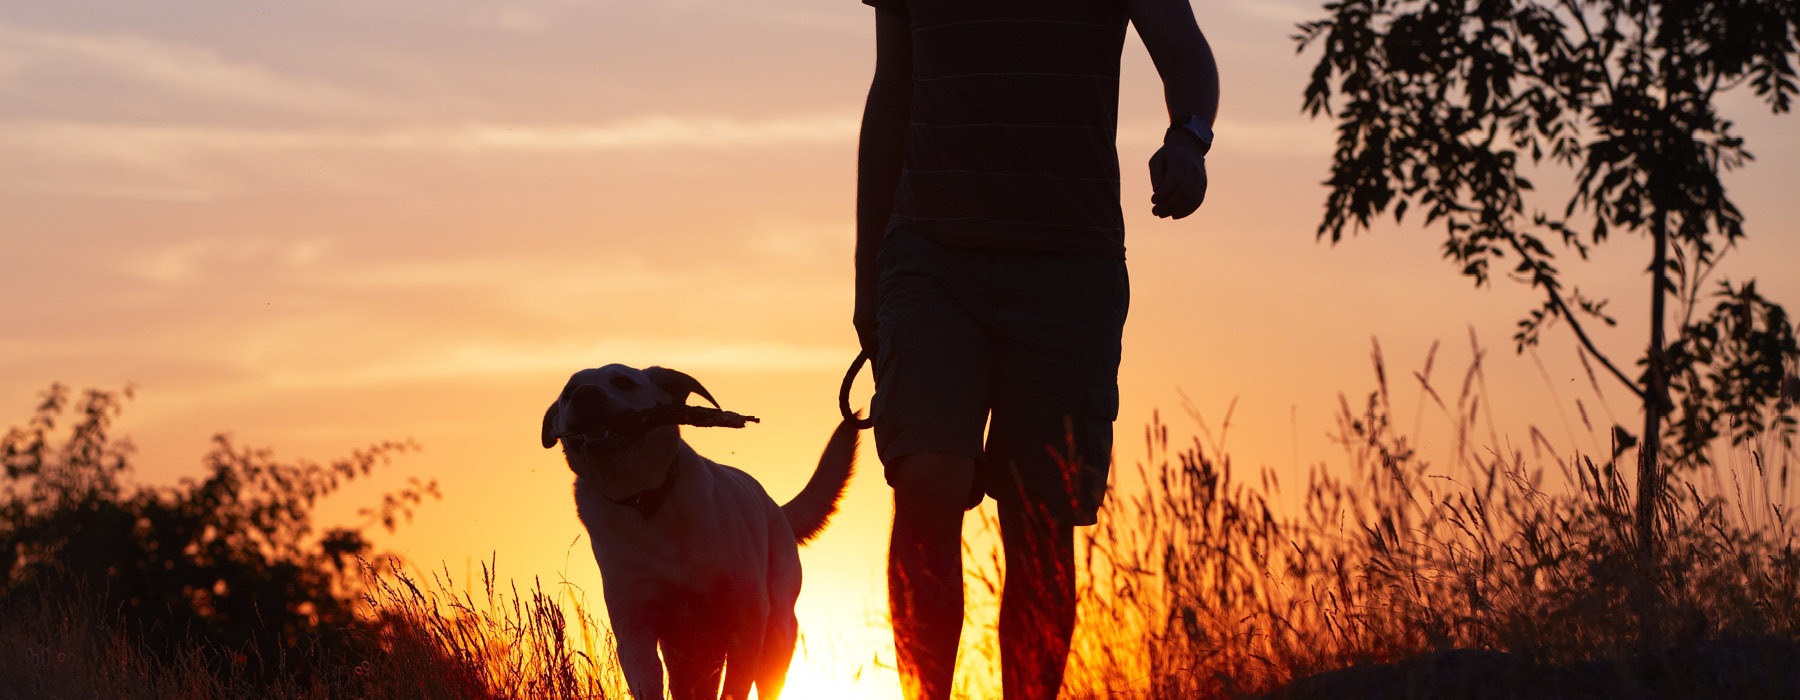 Sillouette of man and dog during sunset